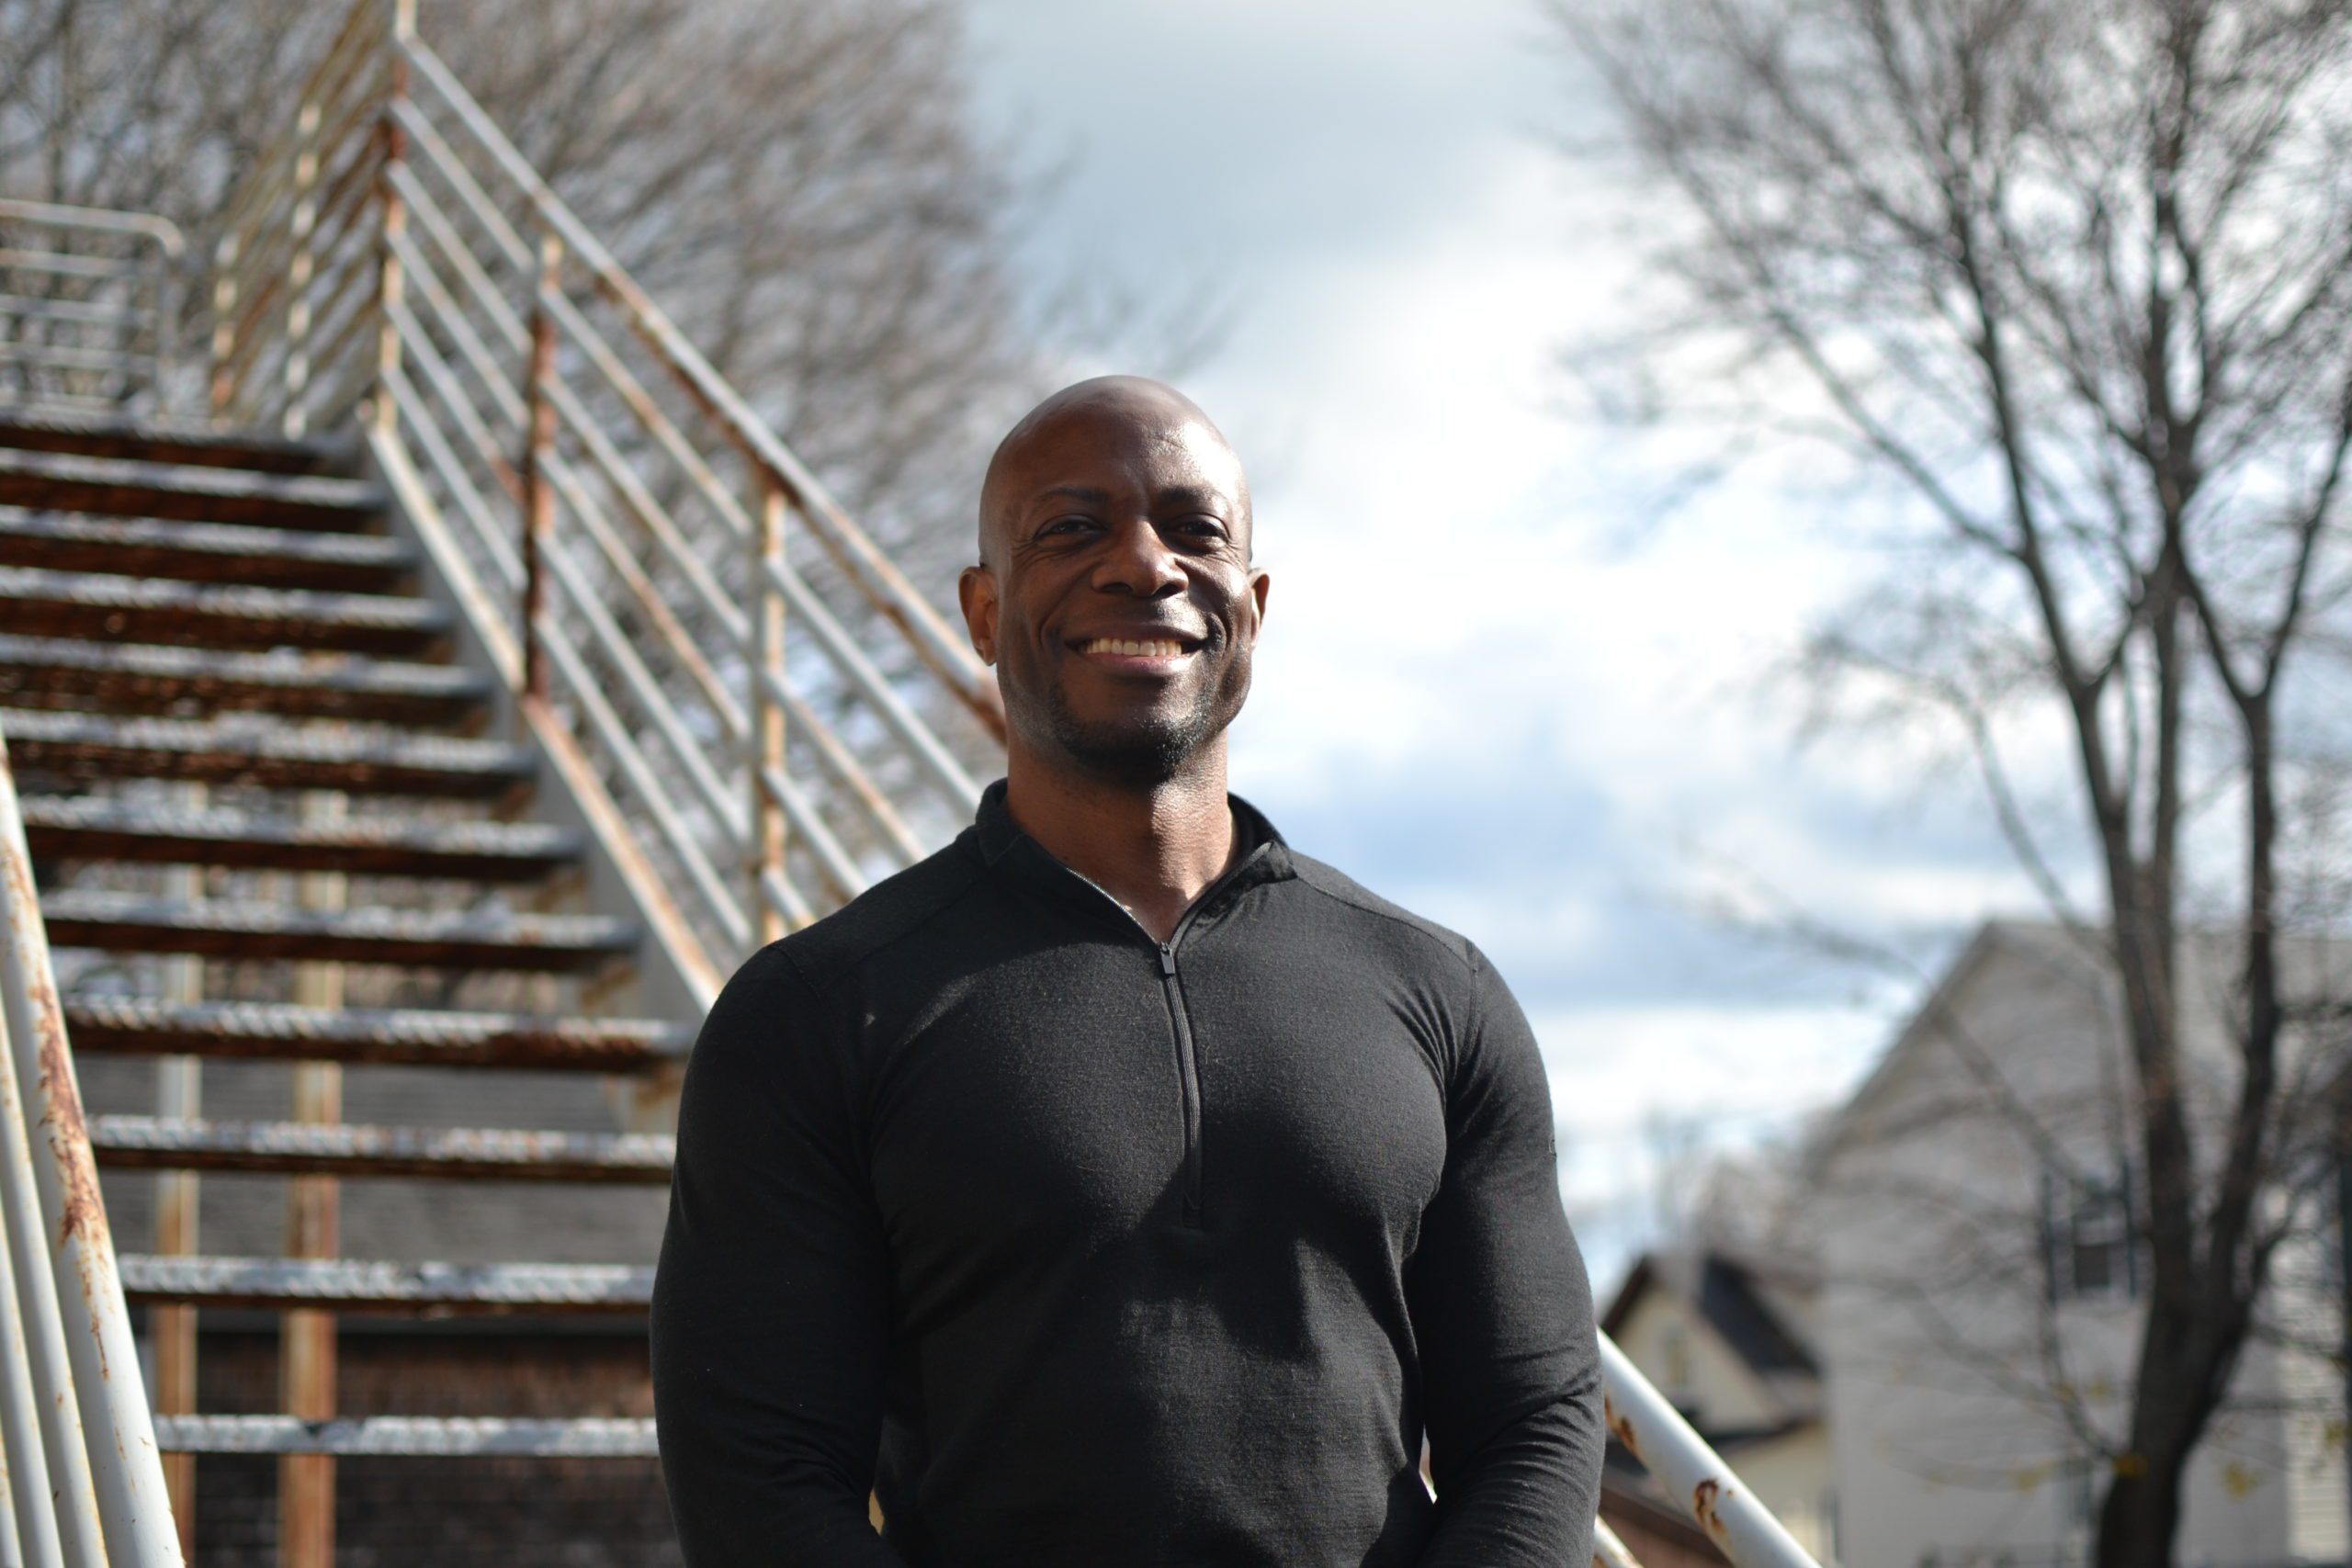 Bar Harbor personal trainer Jacques Newell Taylor gained five clients after he registered his business, The Exercise Design Lab, on the Black Owned Maine online directory. Photo by Jordan Bailey.